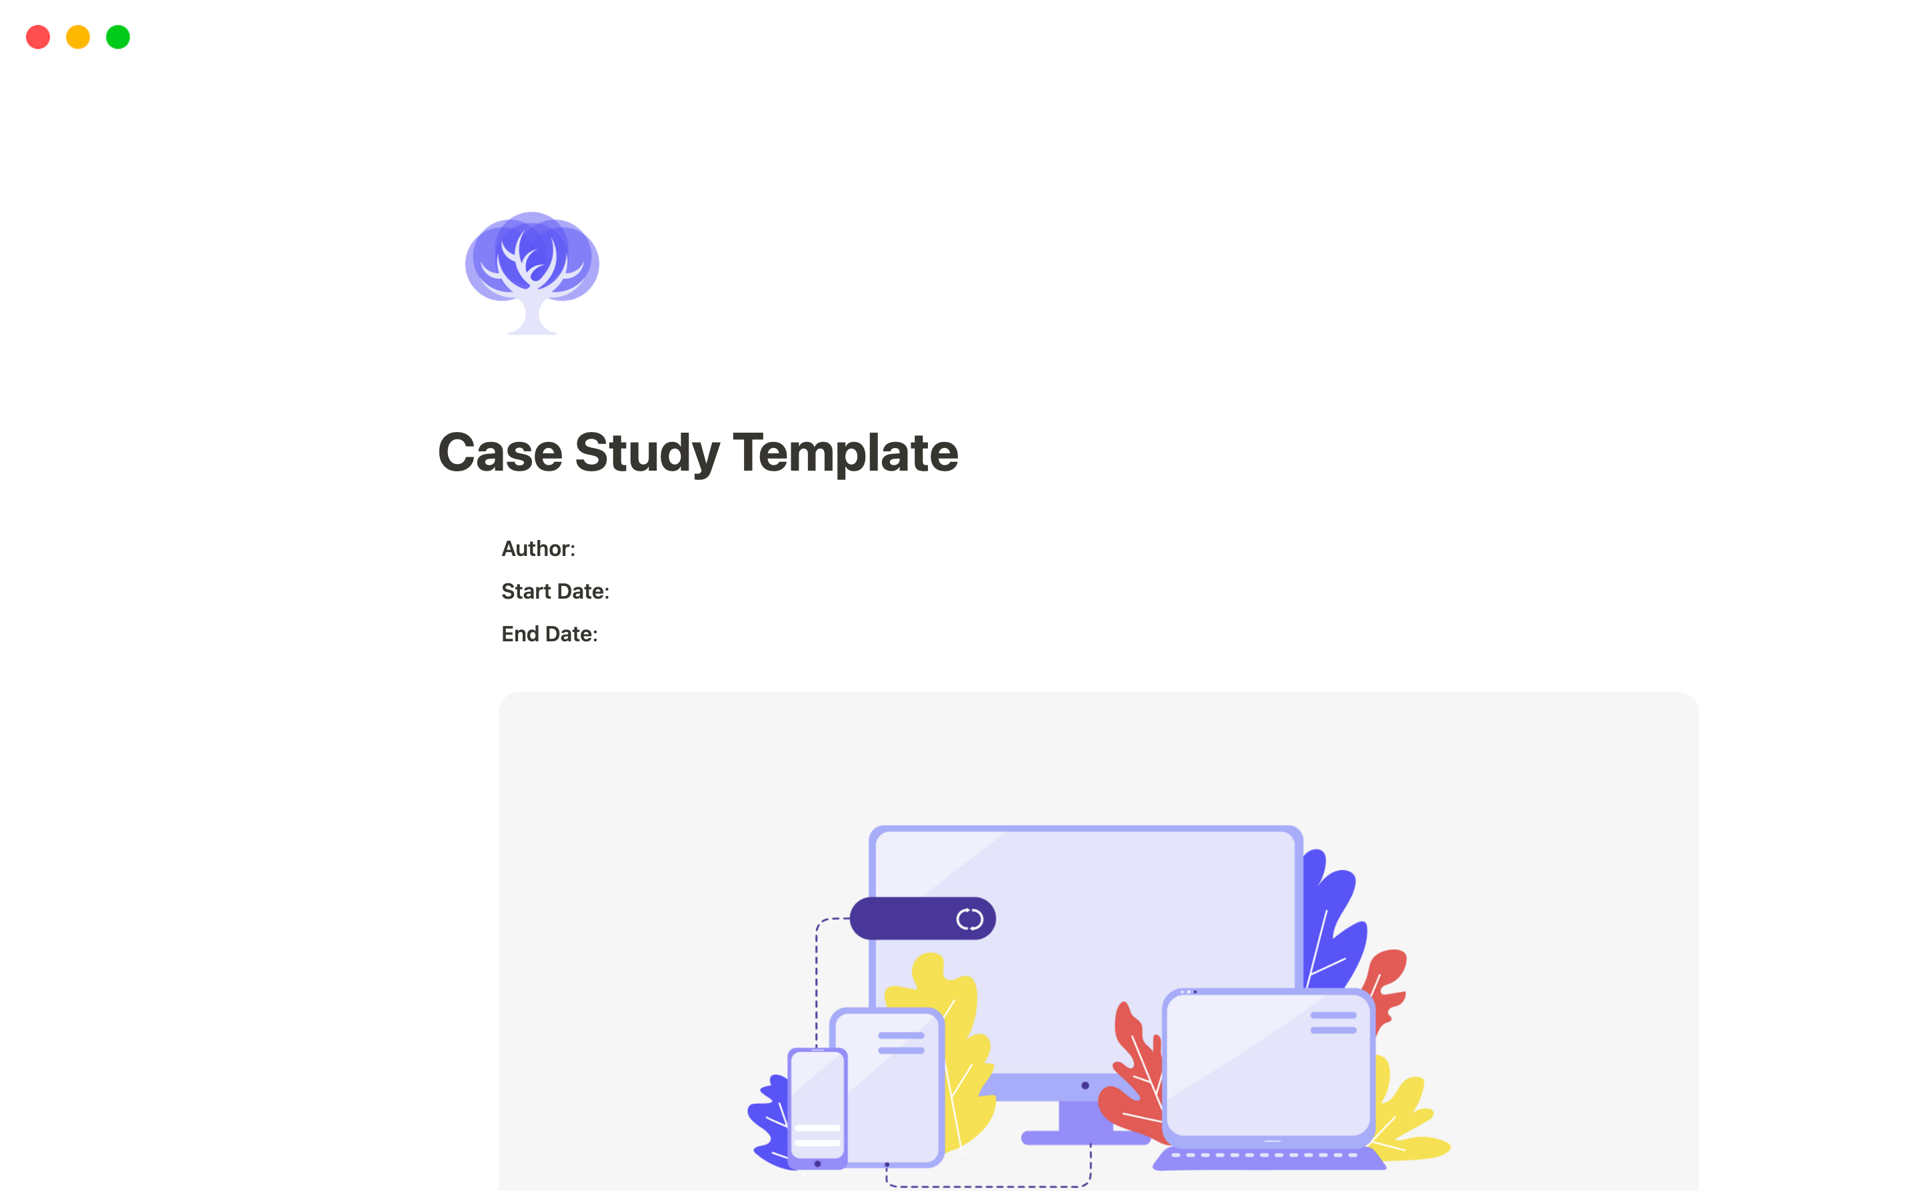 Check out our easy-to-use UX Designer Case Study Template - iIt's perfect for anyone needing a friendly guide to craft a super engaging case study for their portfolio. 